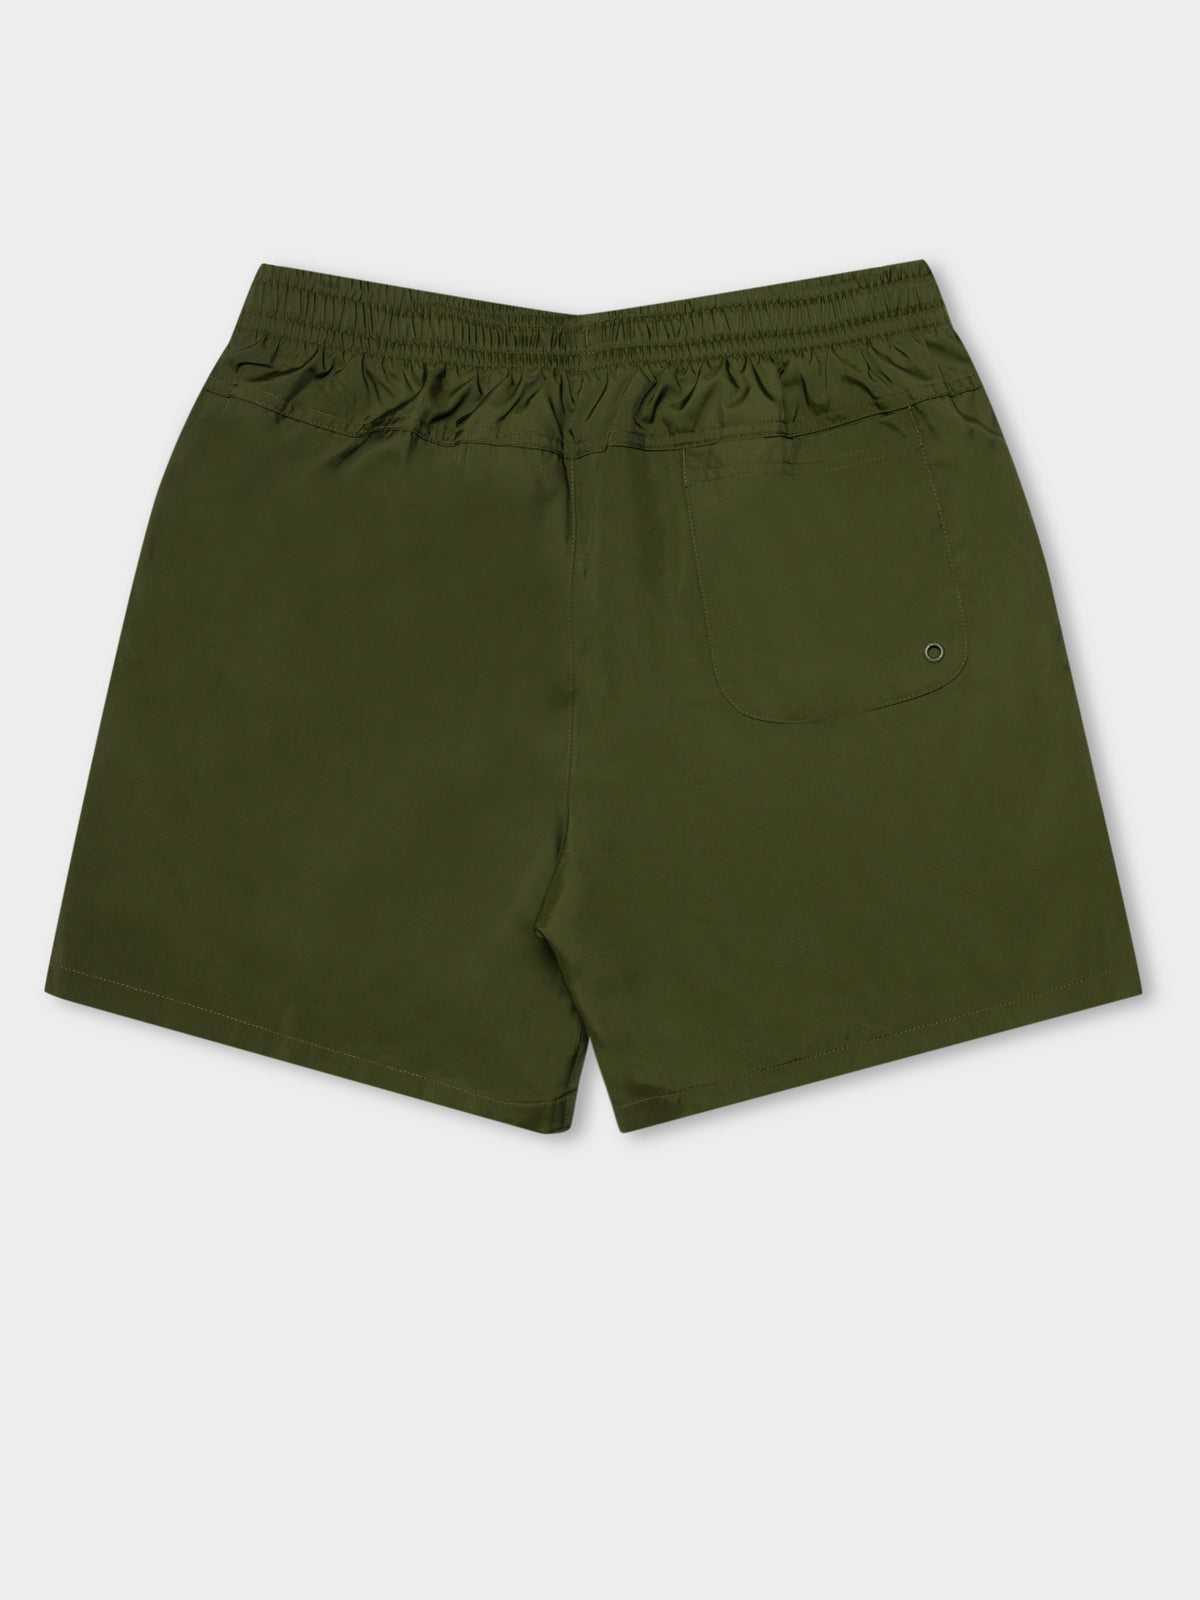 NSW Woven Shorts in Rough Green